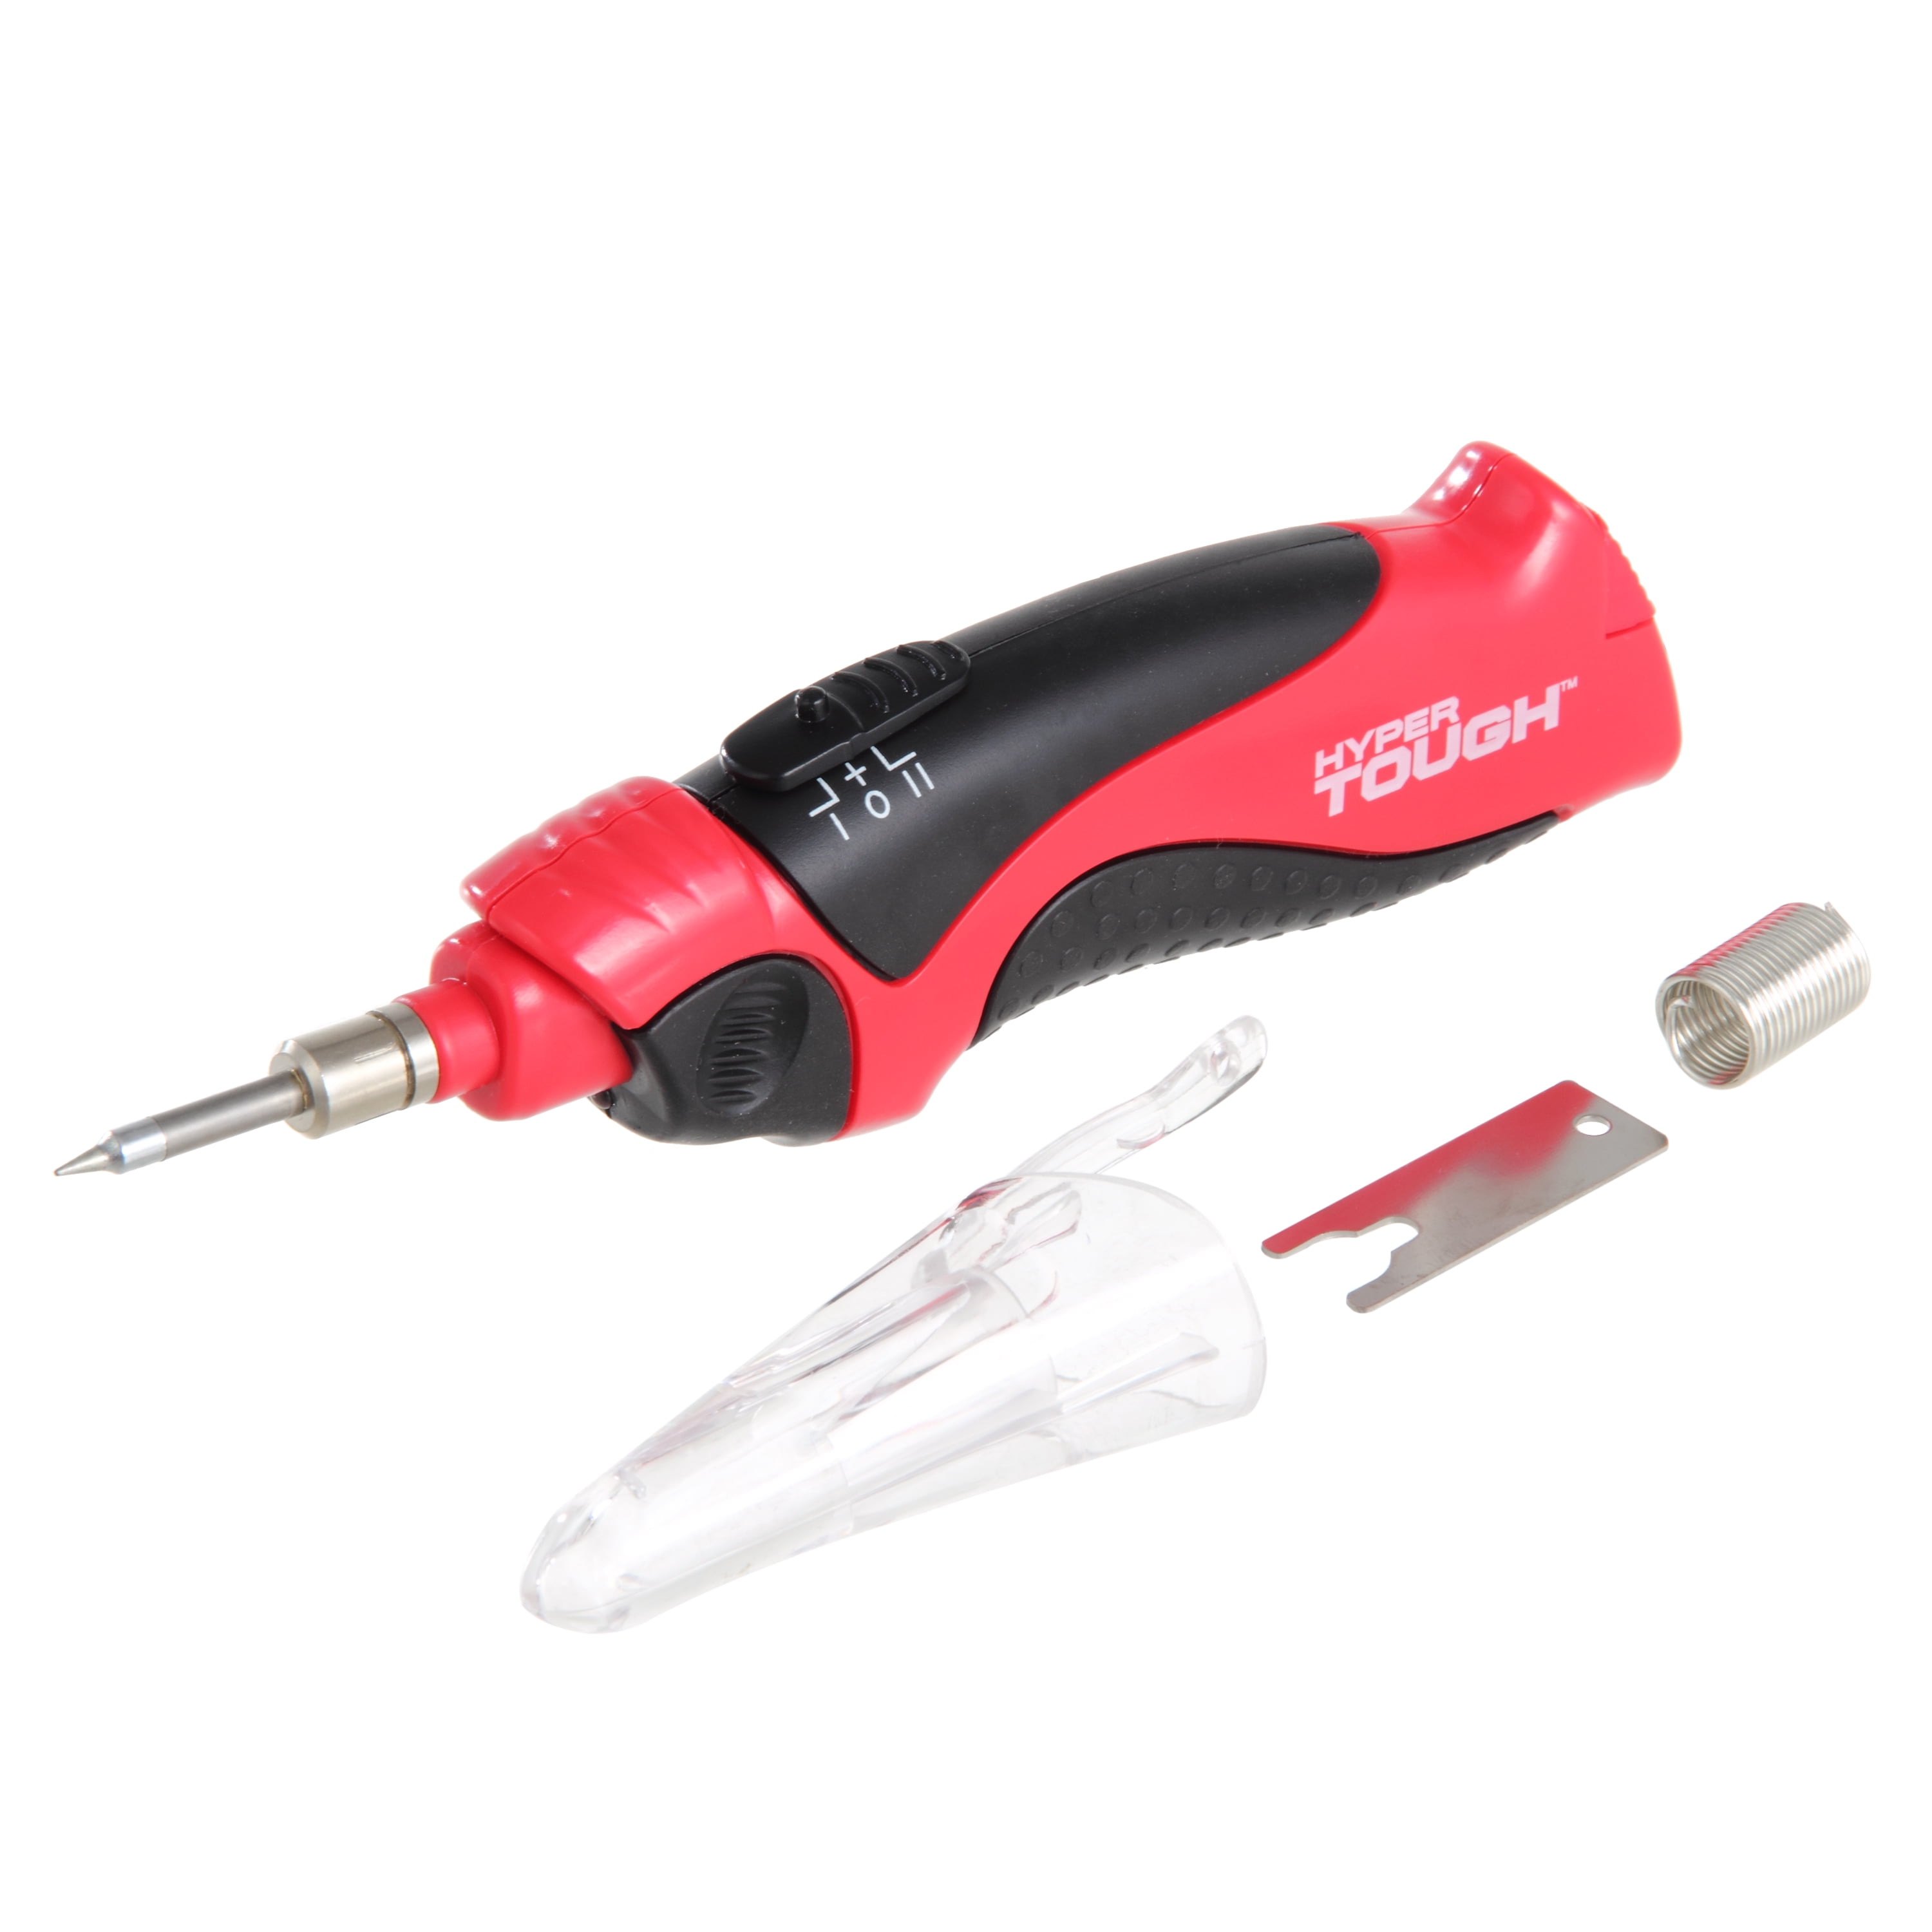 Home Repair Welding Gun Comfortable Grip Heat Evenly Anti-Drop and Durable Portable USB Electric Soldering Iron Small and Convenient 